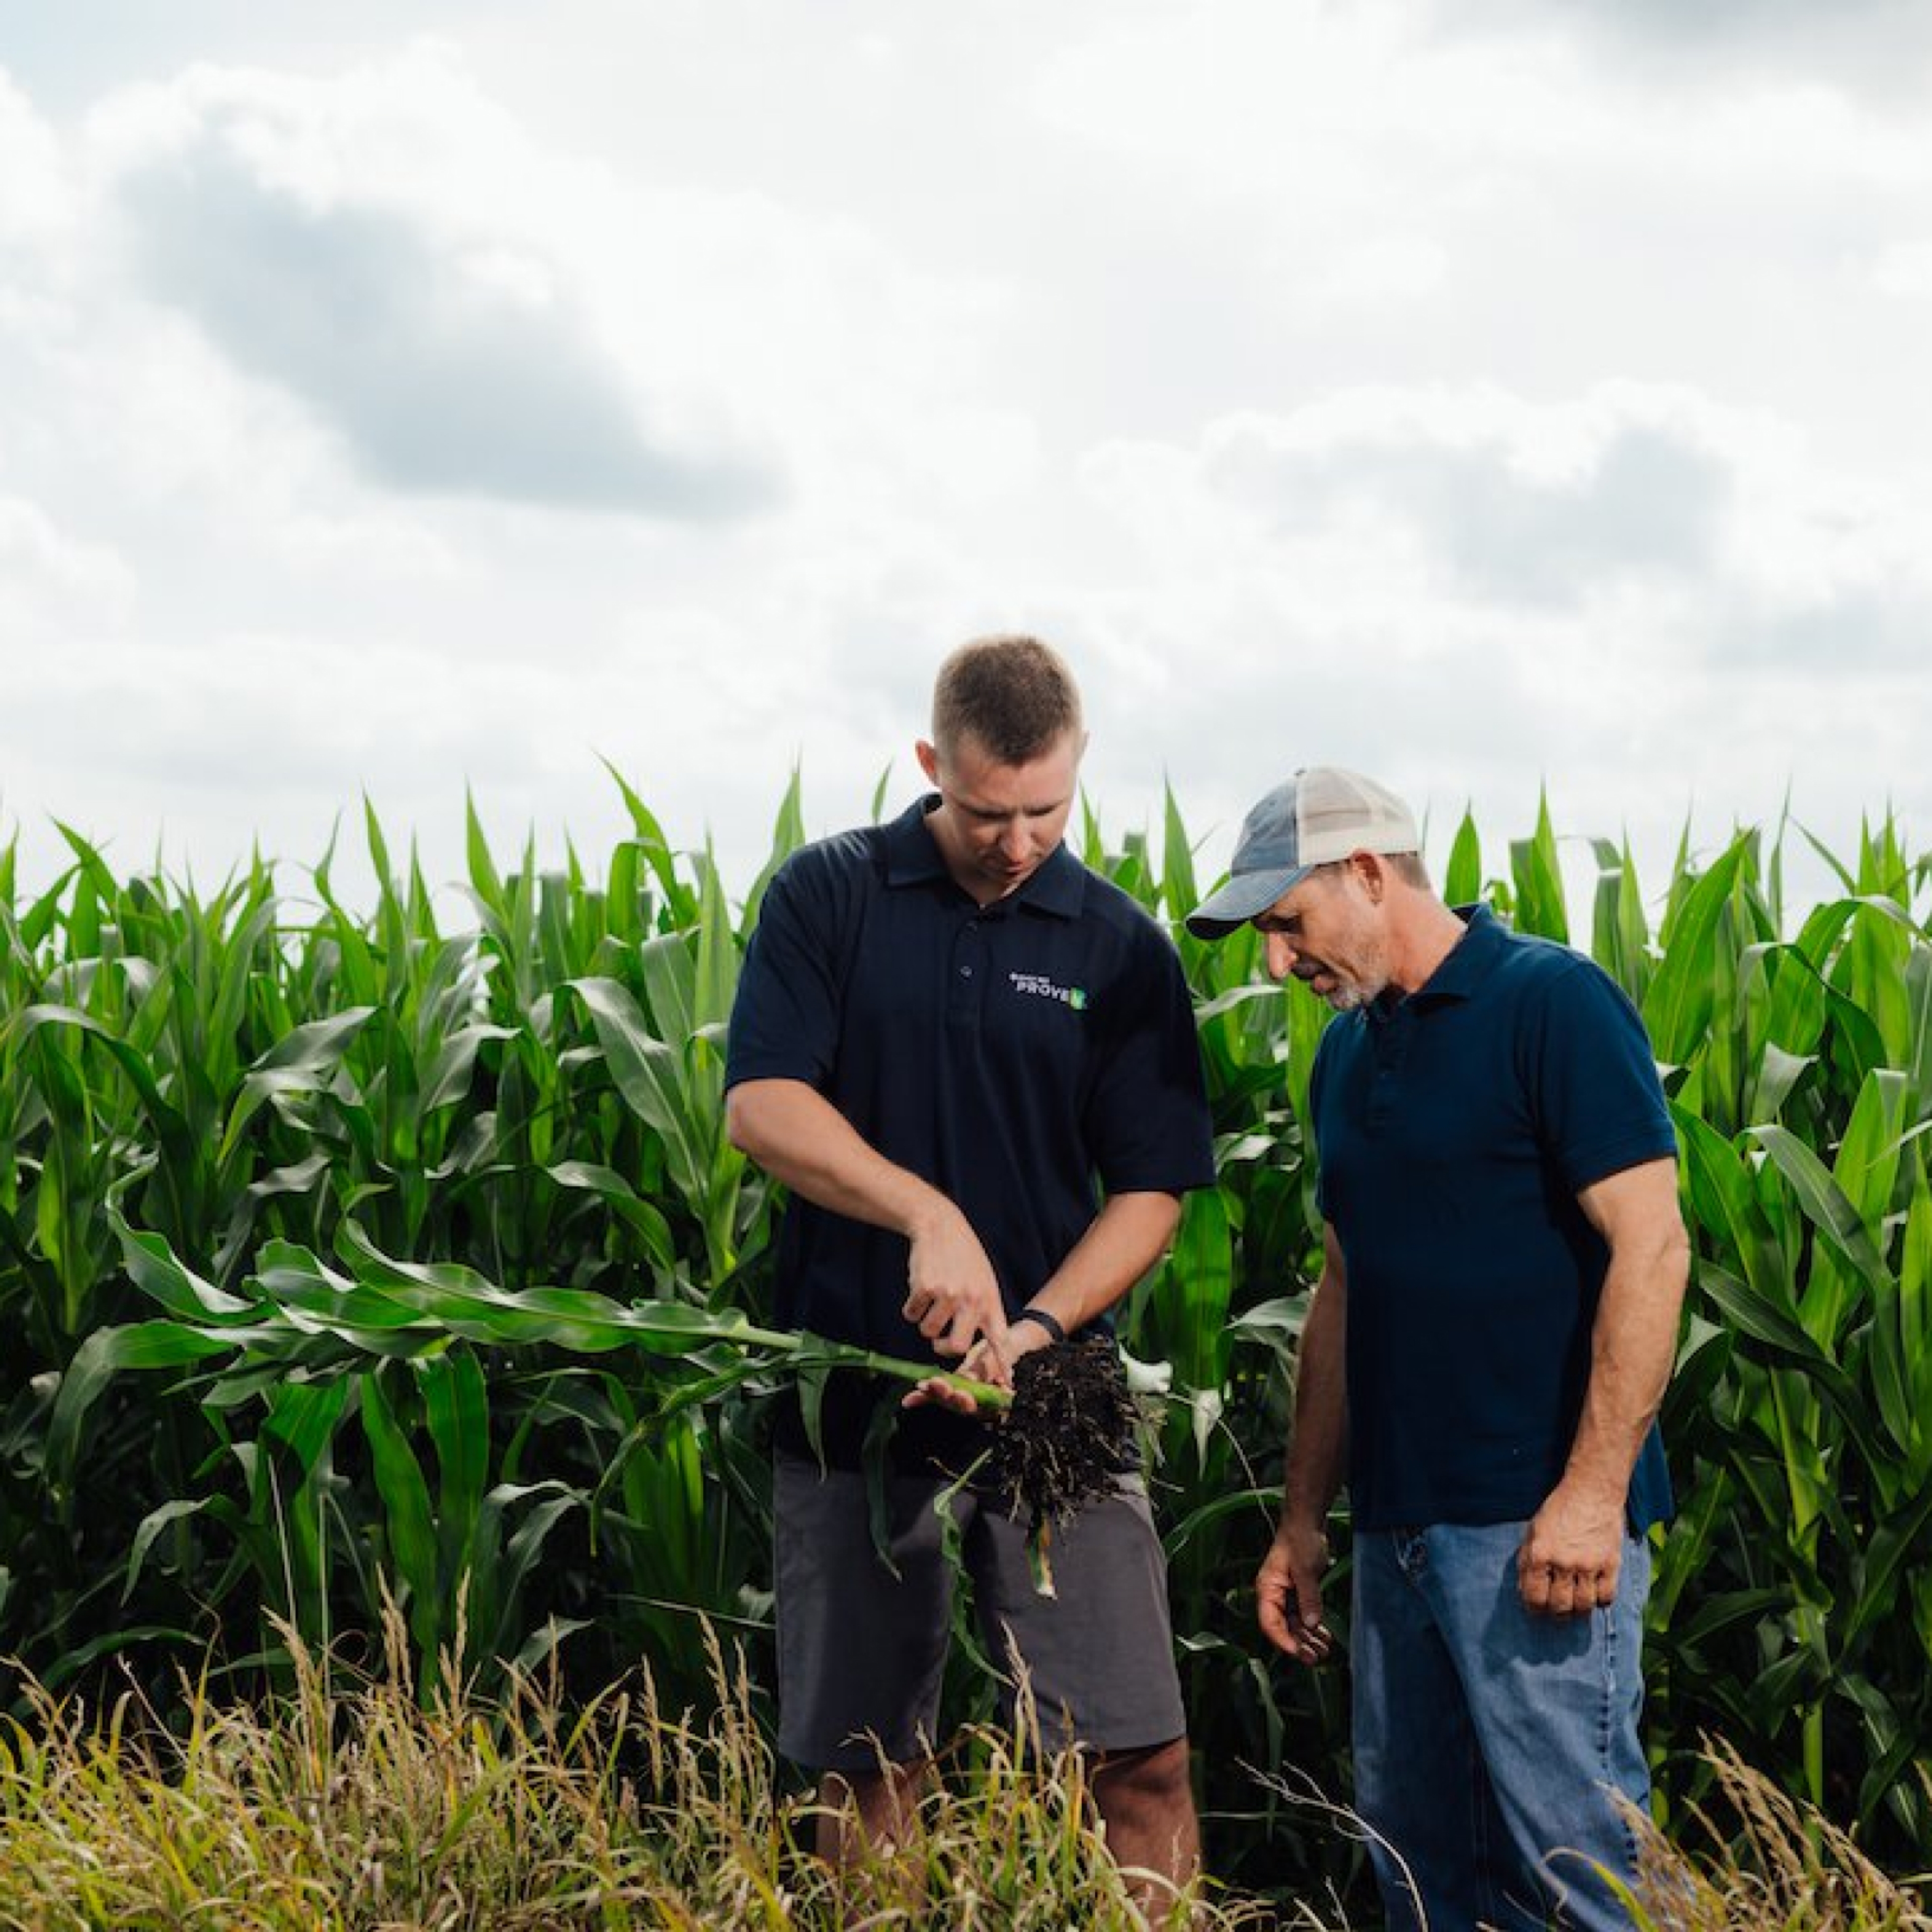 Pivot Bio agronomist points out root structures to a Farmer in a corn field